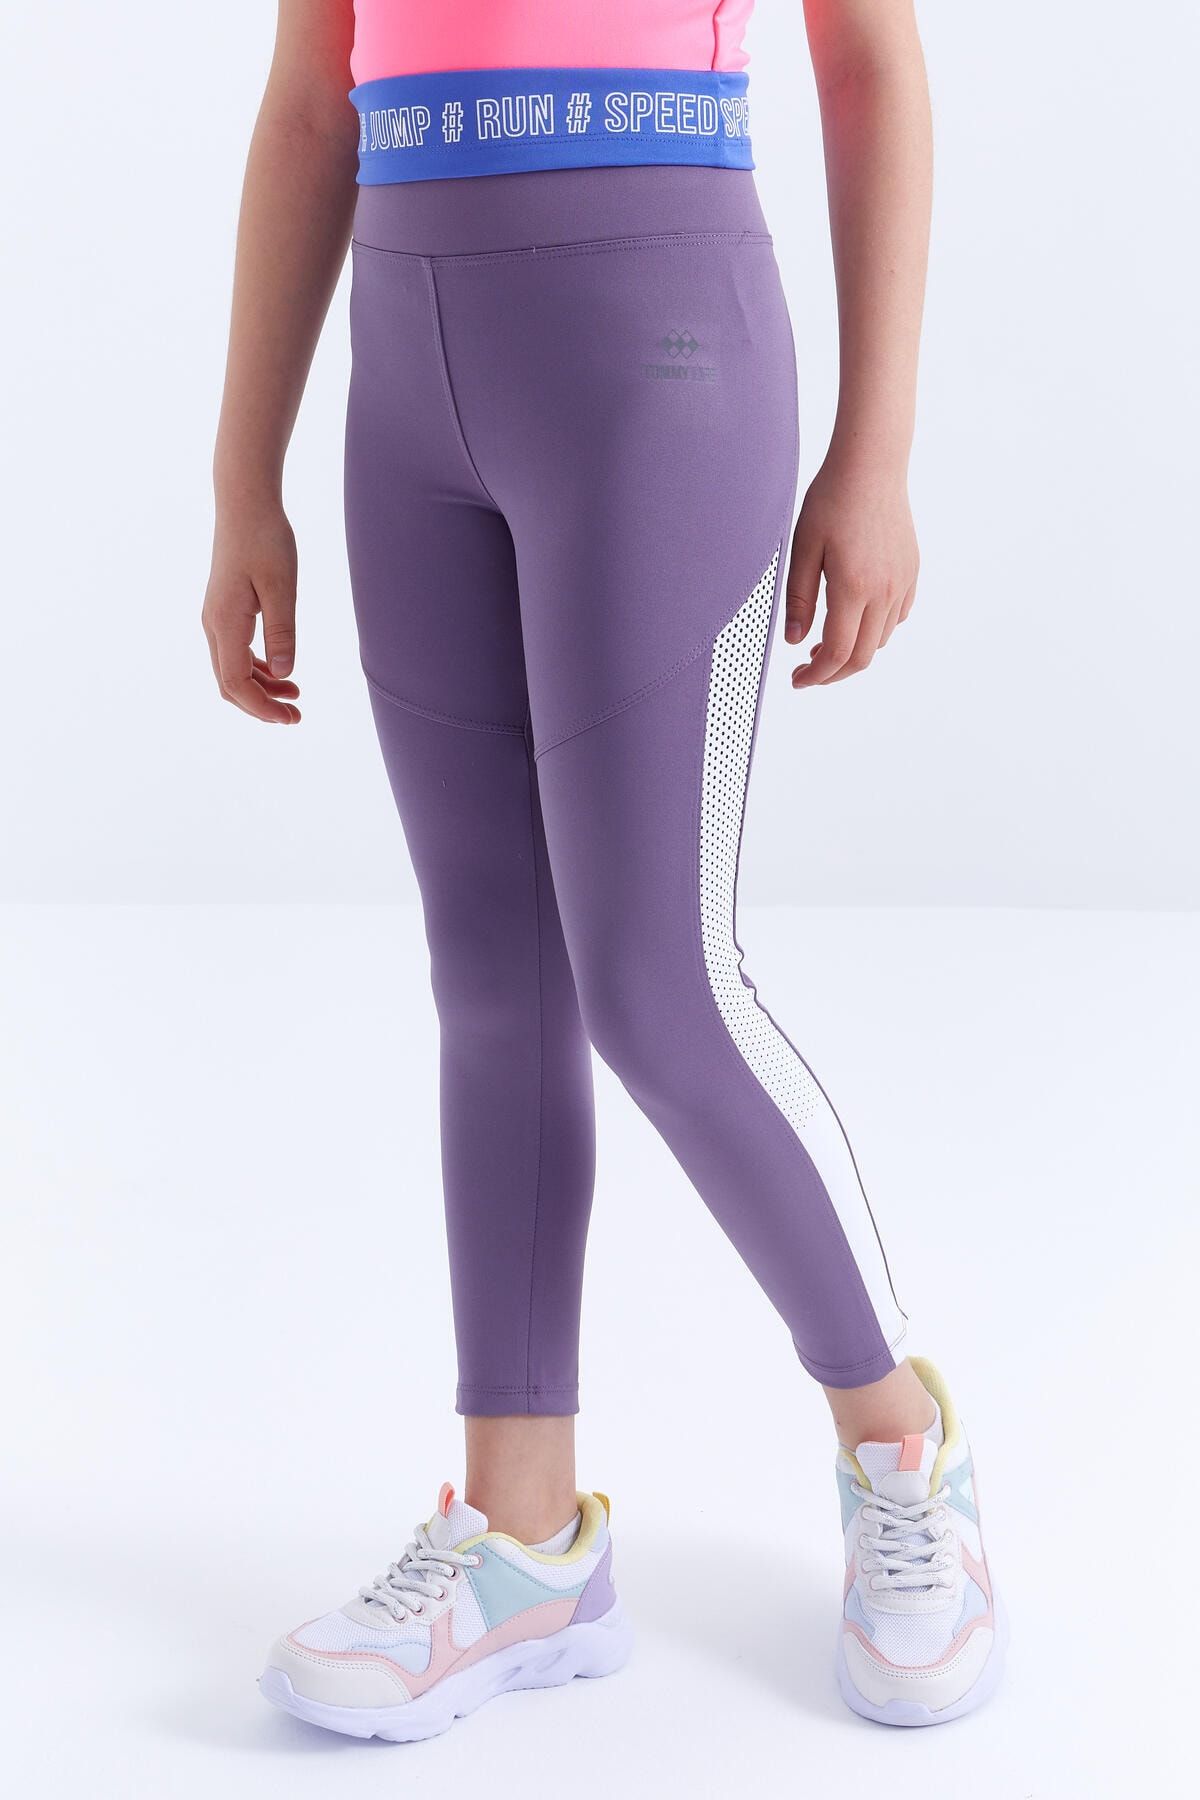 Jadore teddy lilac printed tee & legging coord – Glamify Famous